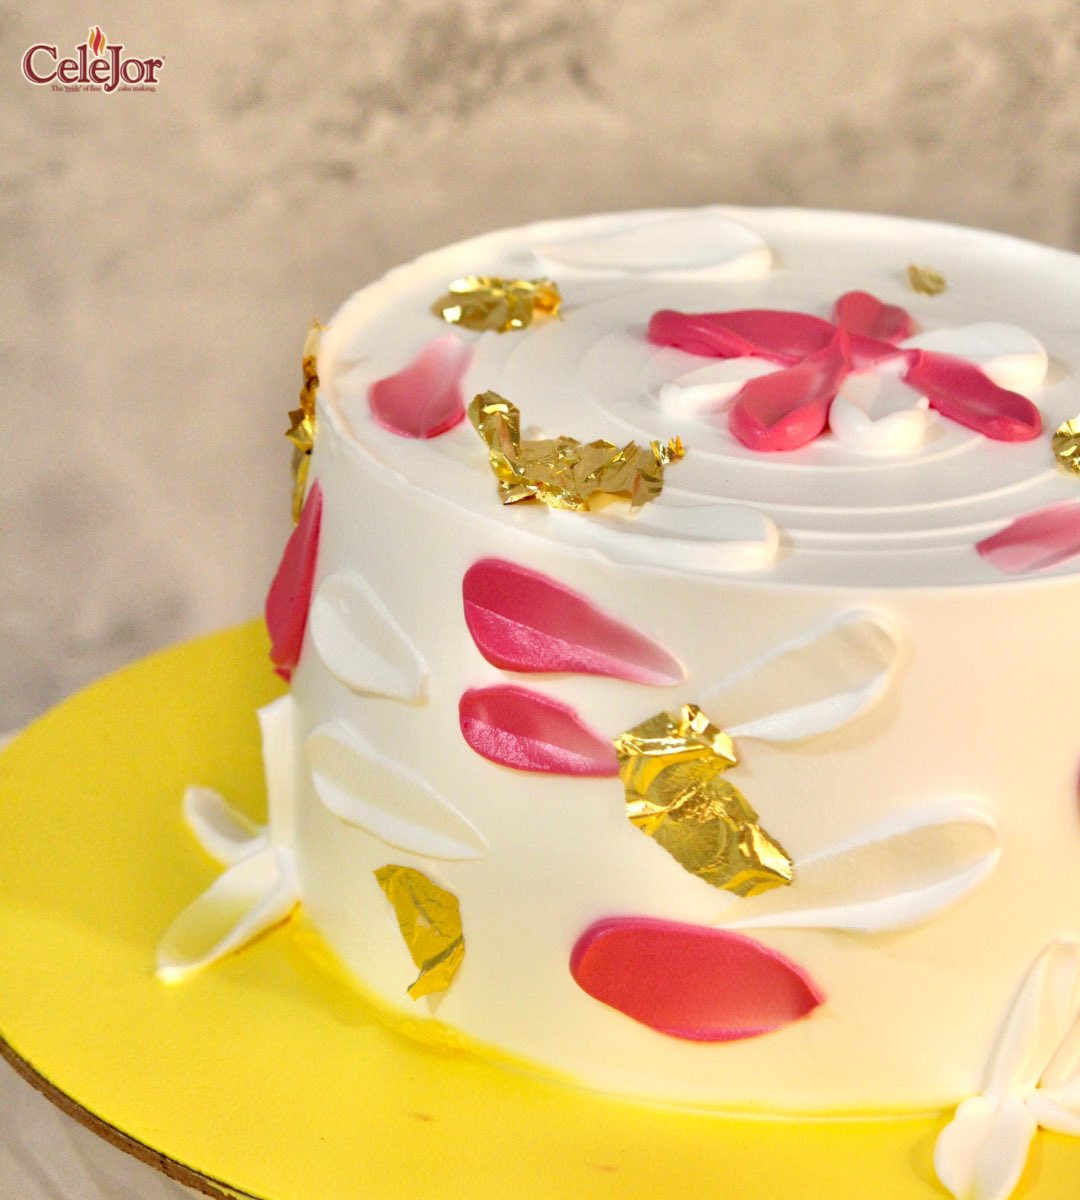 Slice, Savour, Repeat 🎂😋

To place your order, connect with us on 7045370022 / 022-23788000 

#birthdaycake #cake #mumbai #designercakes #designercake #customcakes #mumbaibakery #mumbaicake